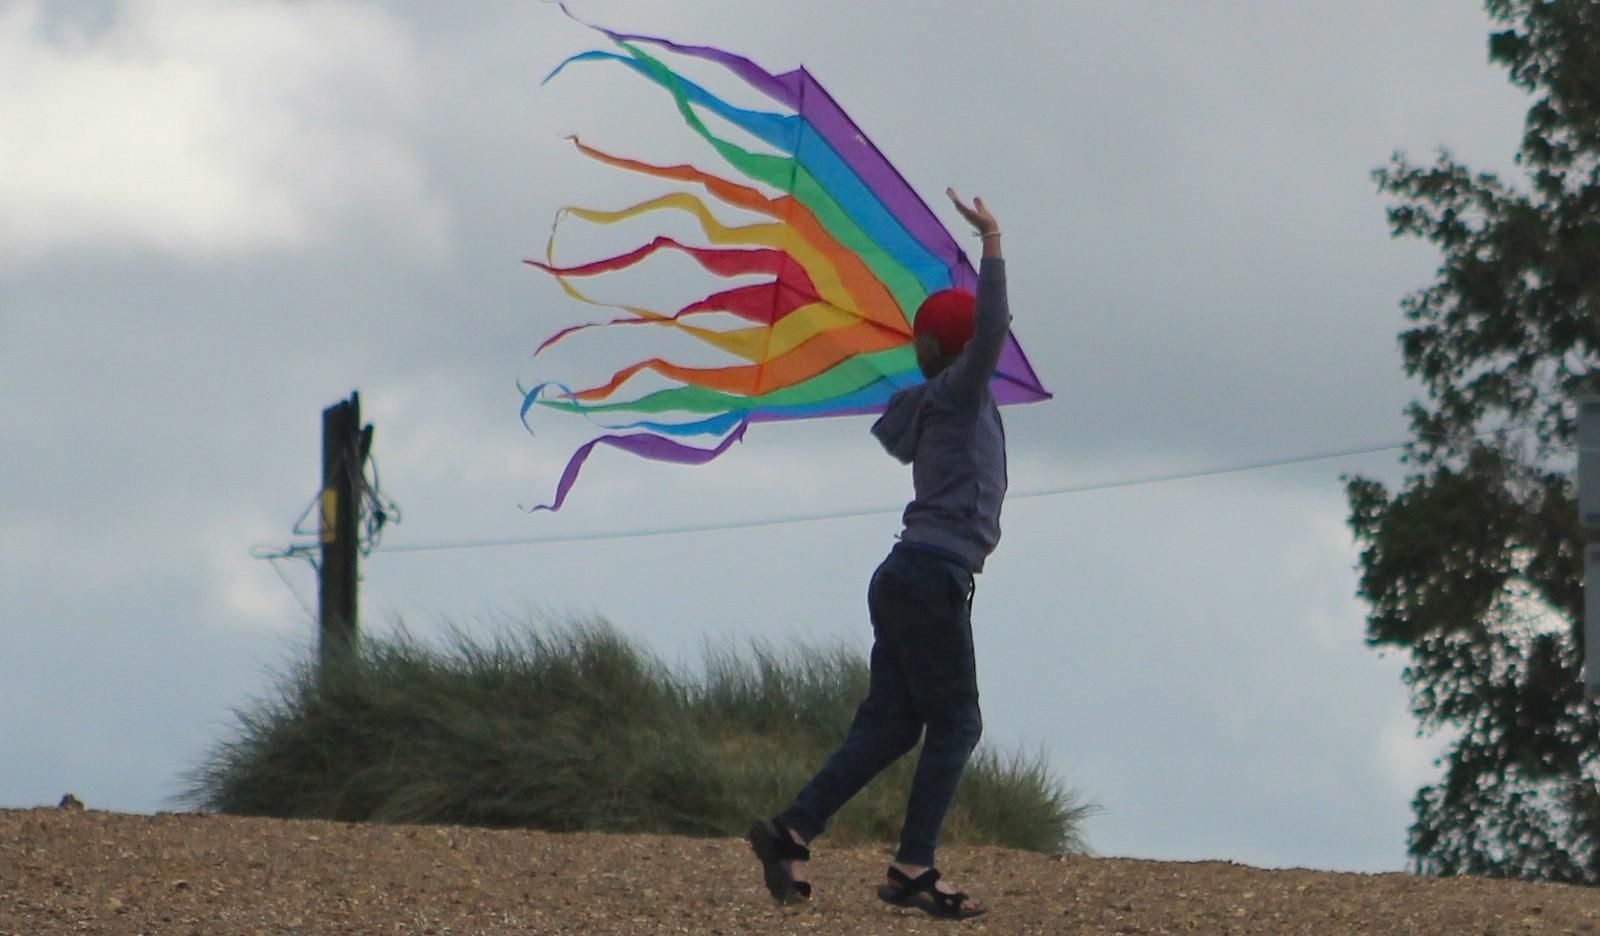 Come fly your kite South Beach Heacham, young boy fling his kite